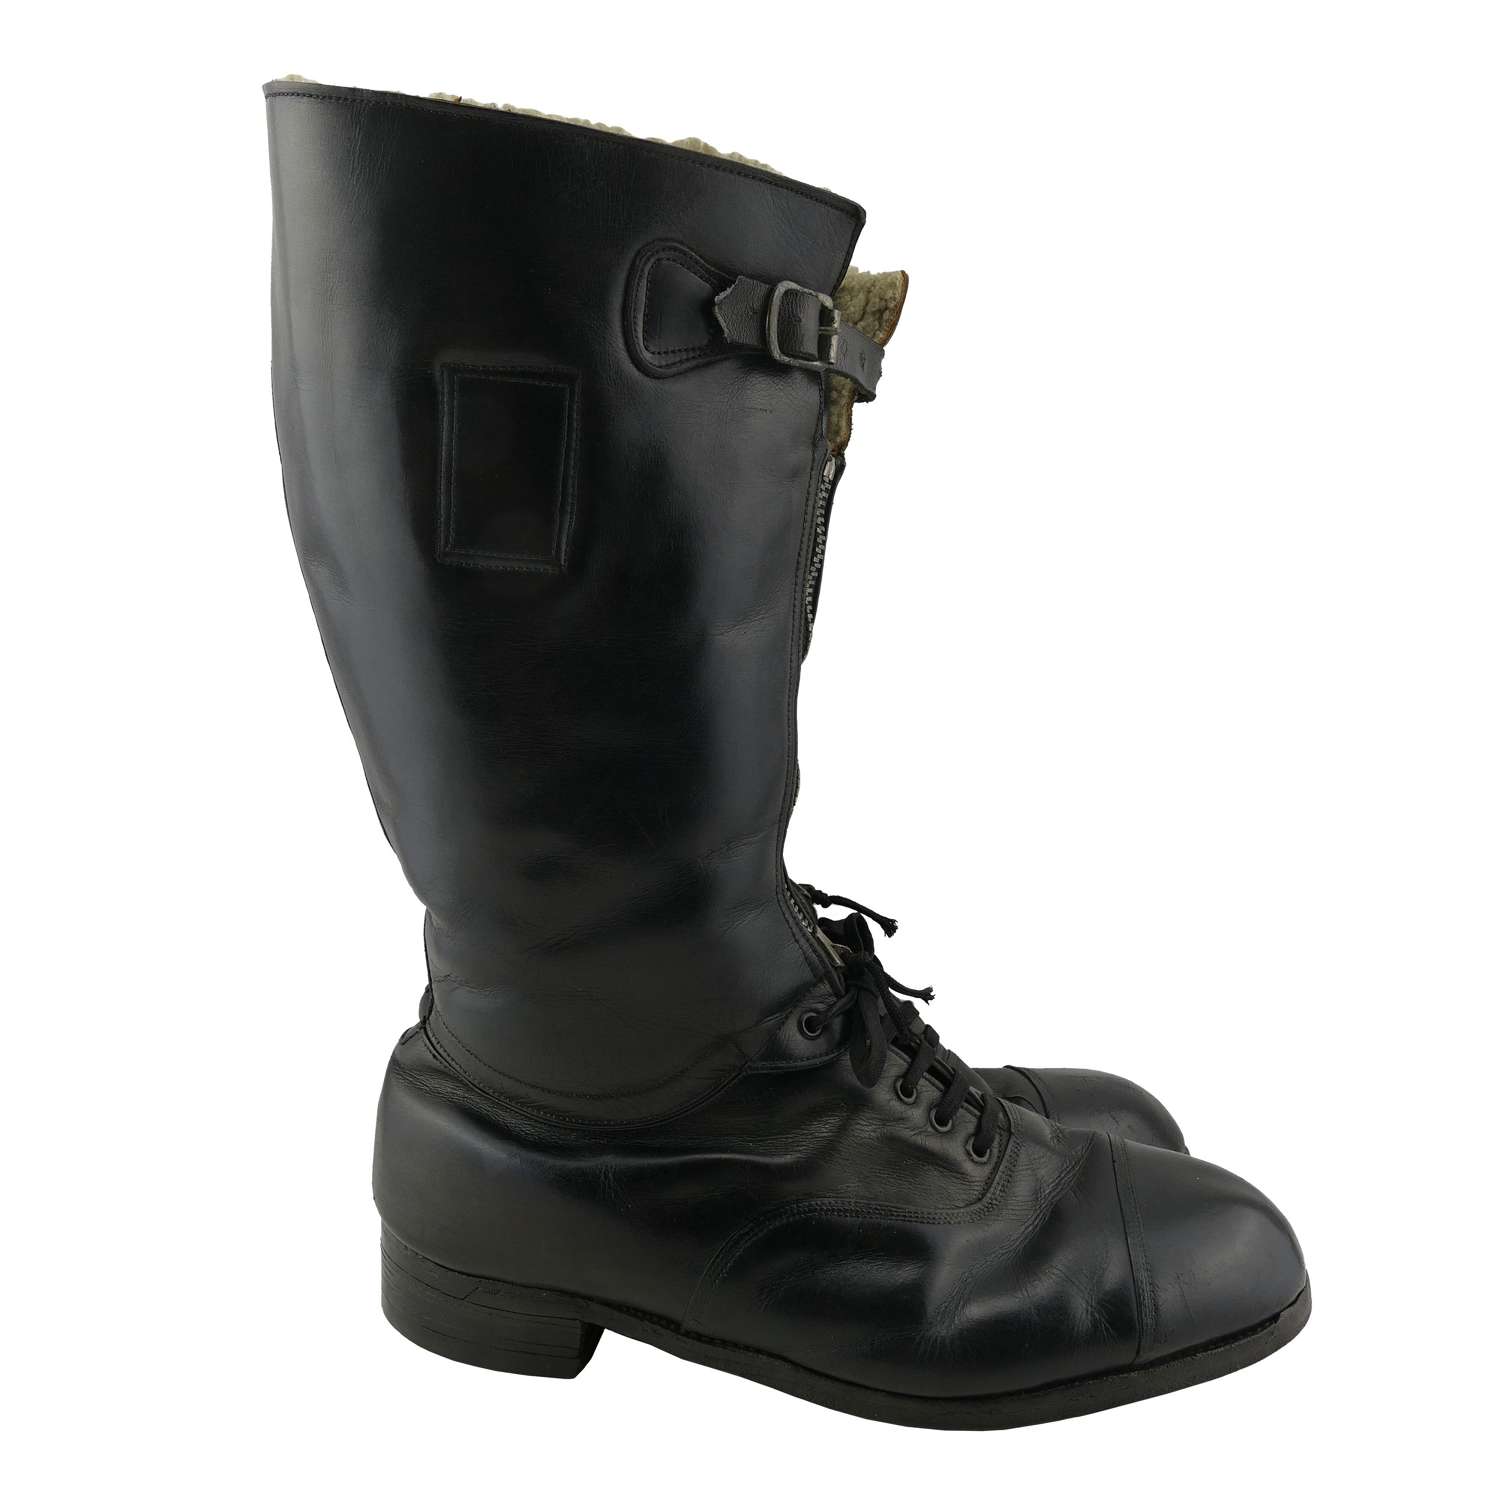 RAF 'Nuffield' prototype escape boots, 1st pattern